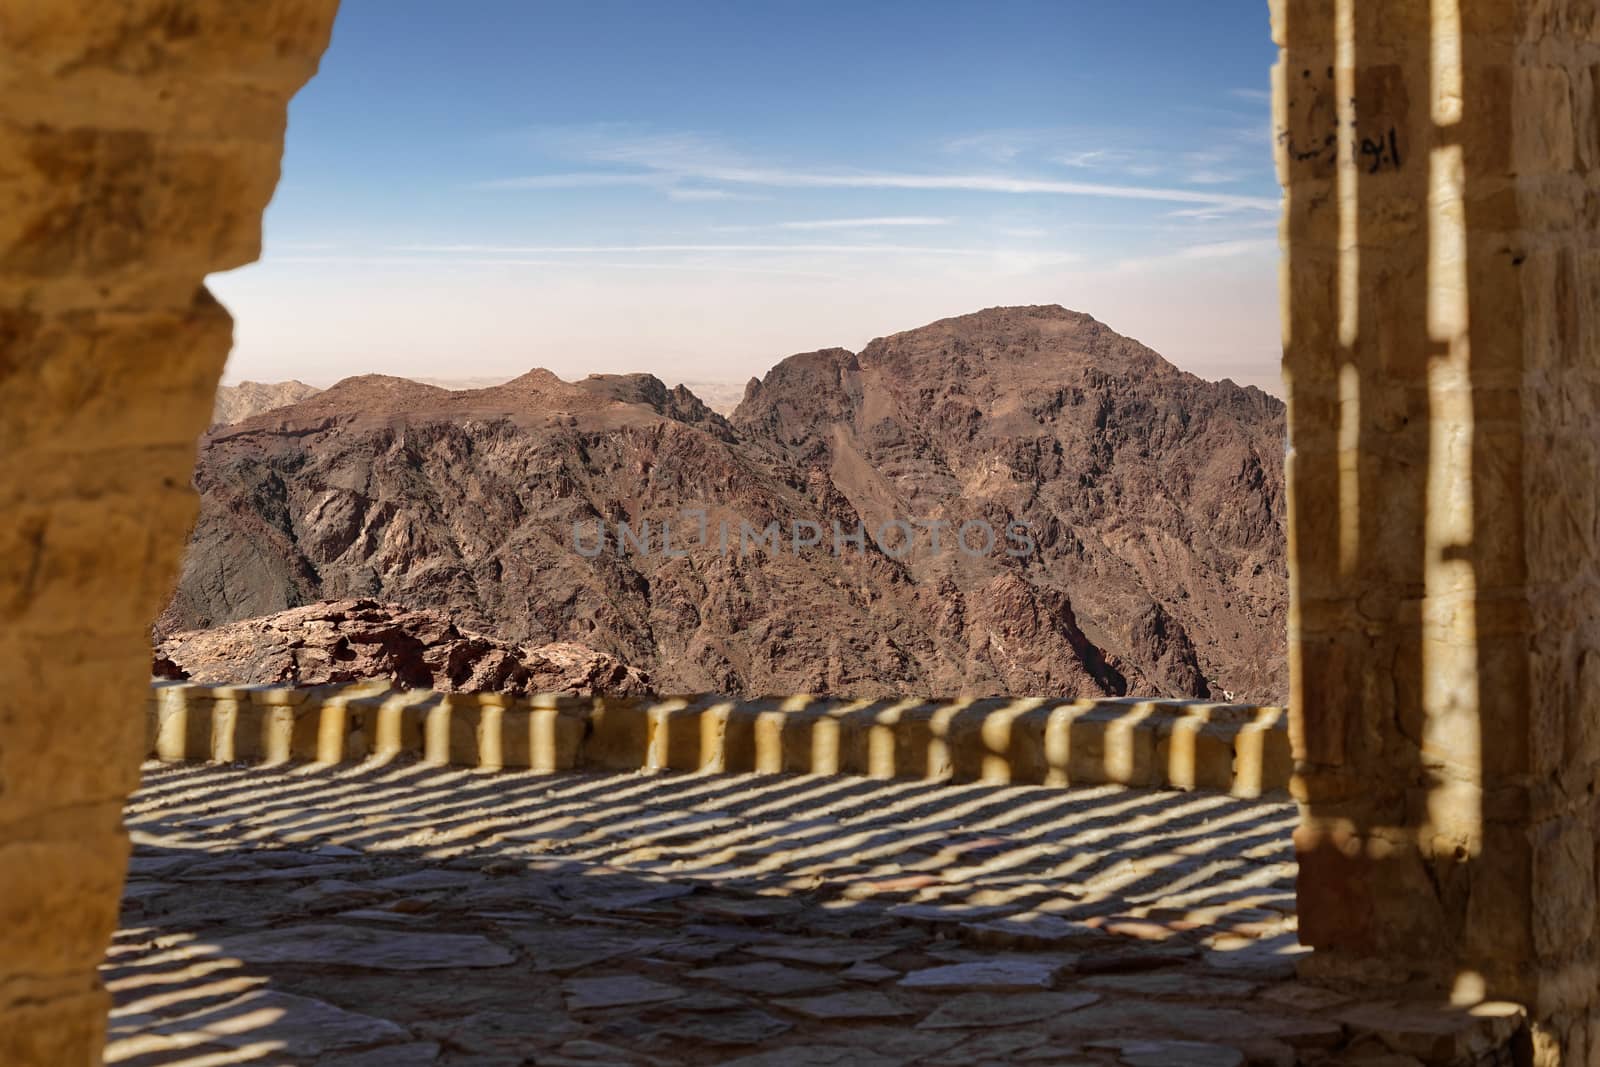 View over a terrace to the barren mountain landscape in southern Jordan, composite photograph